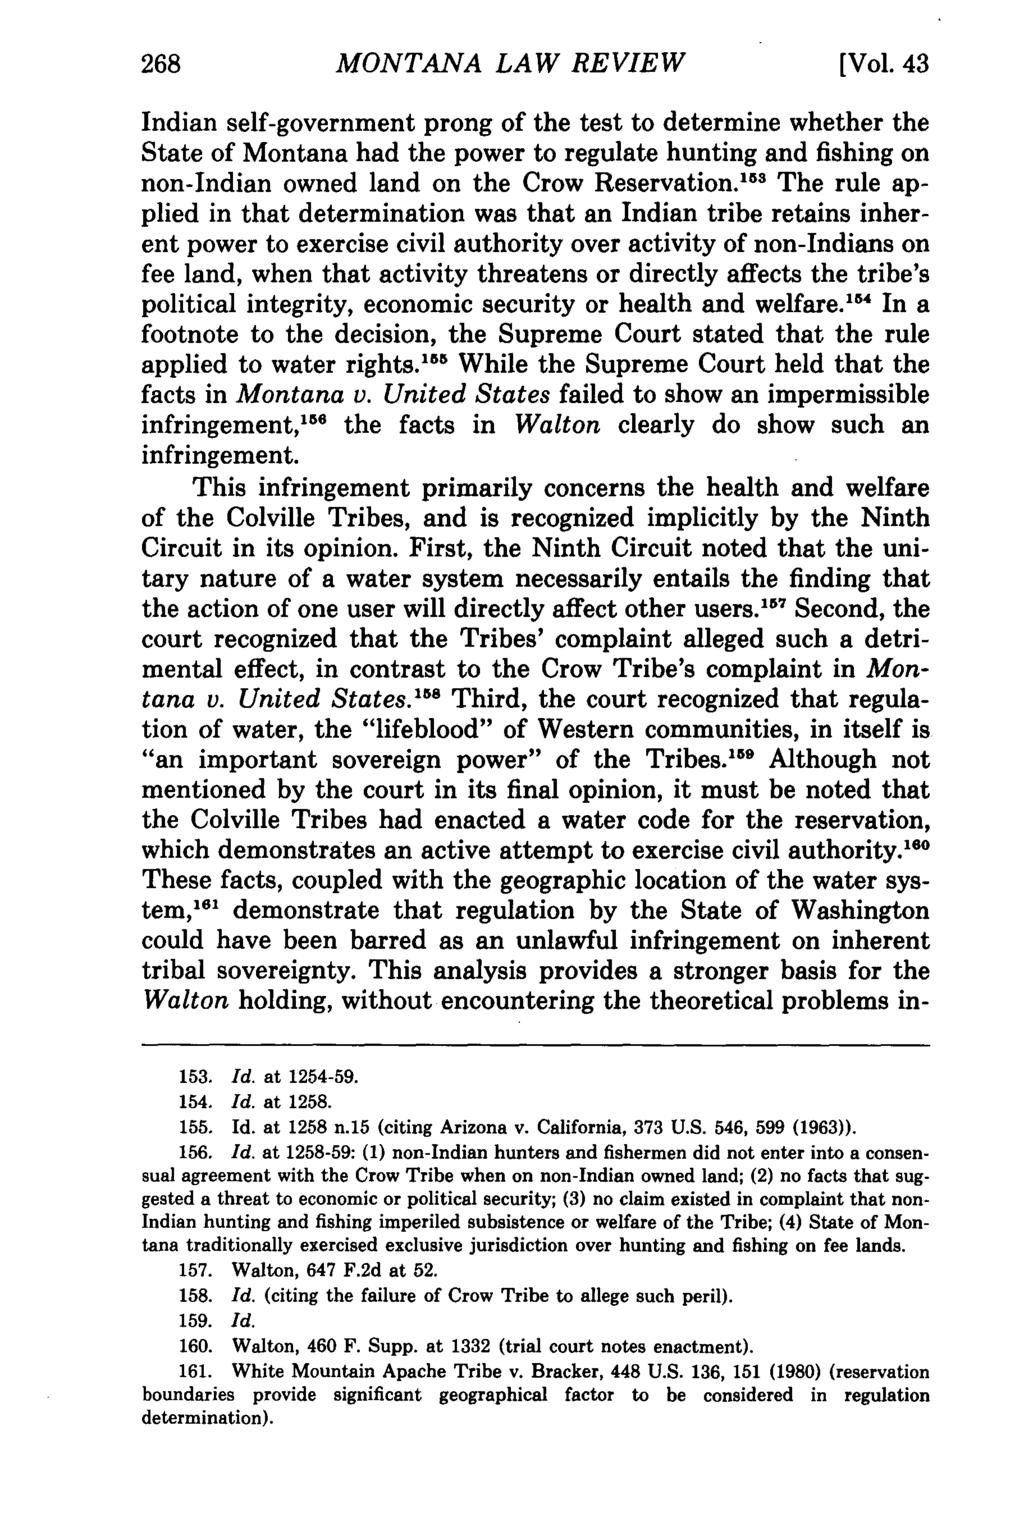 268 Montana MONTANA Law Review, Vol. LAW 43 [1982], REVIEW Iss. 2, Art. 7 [Vol.